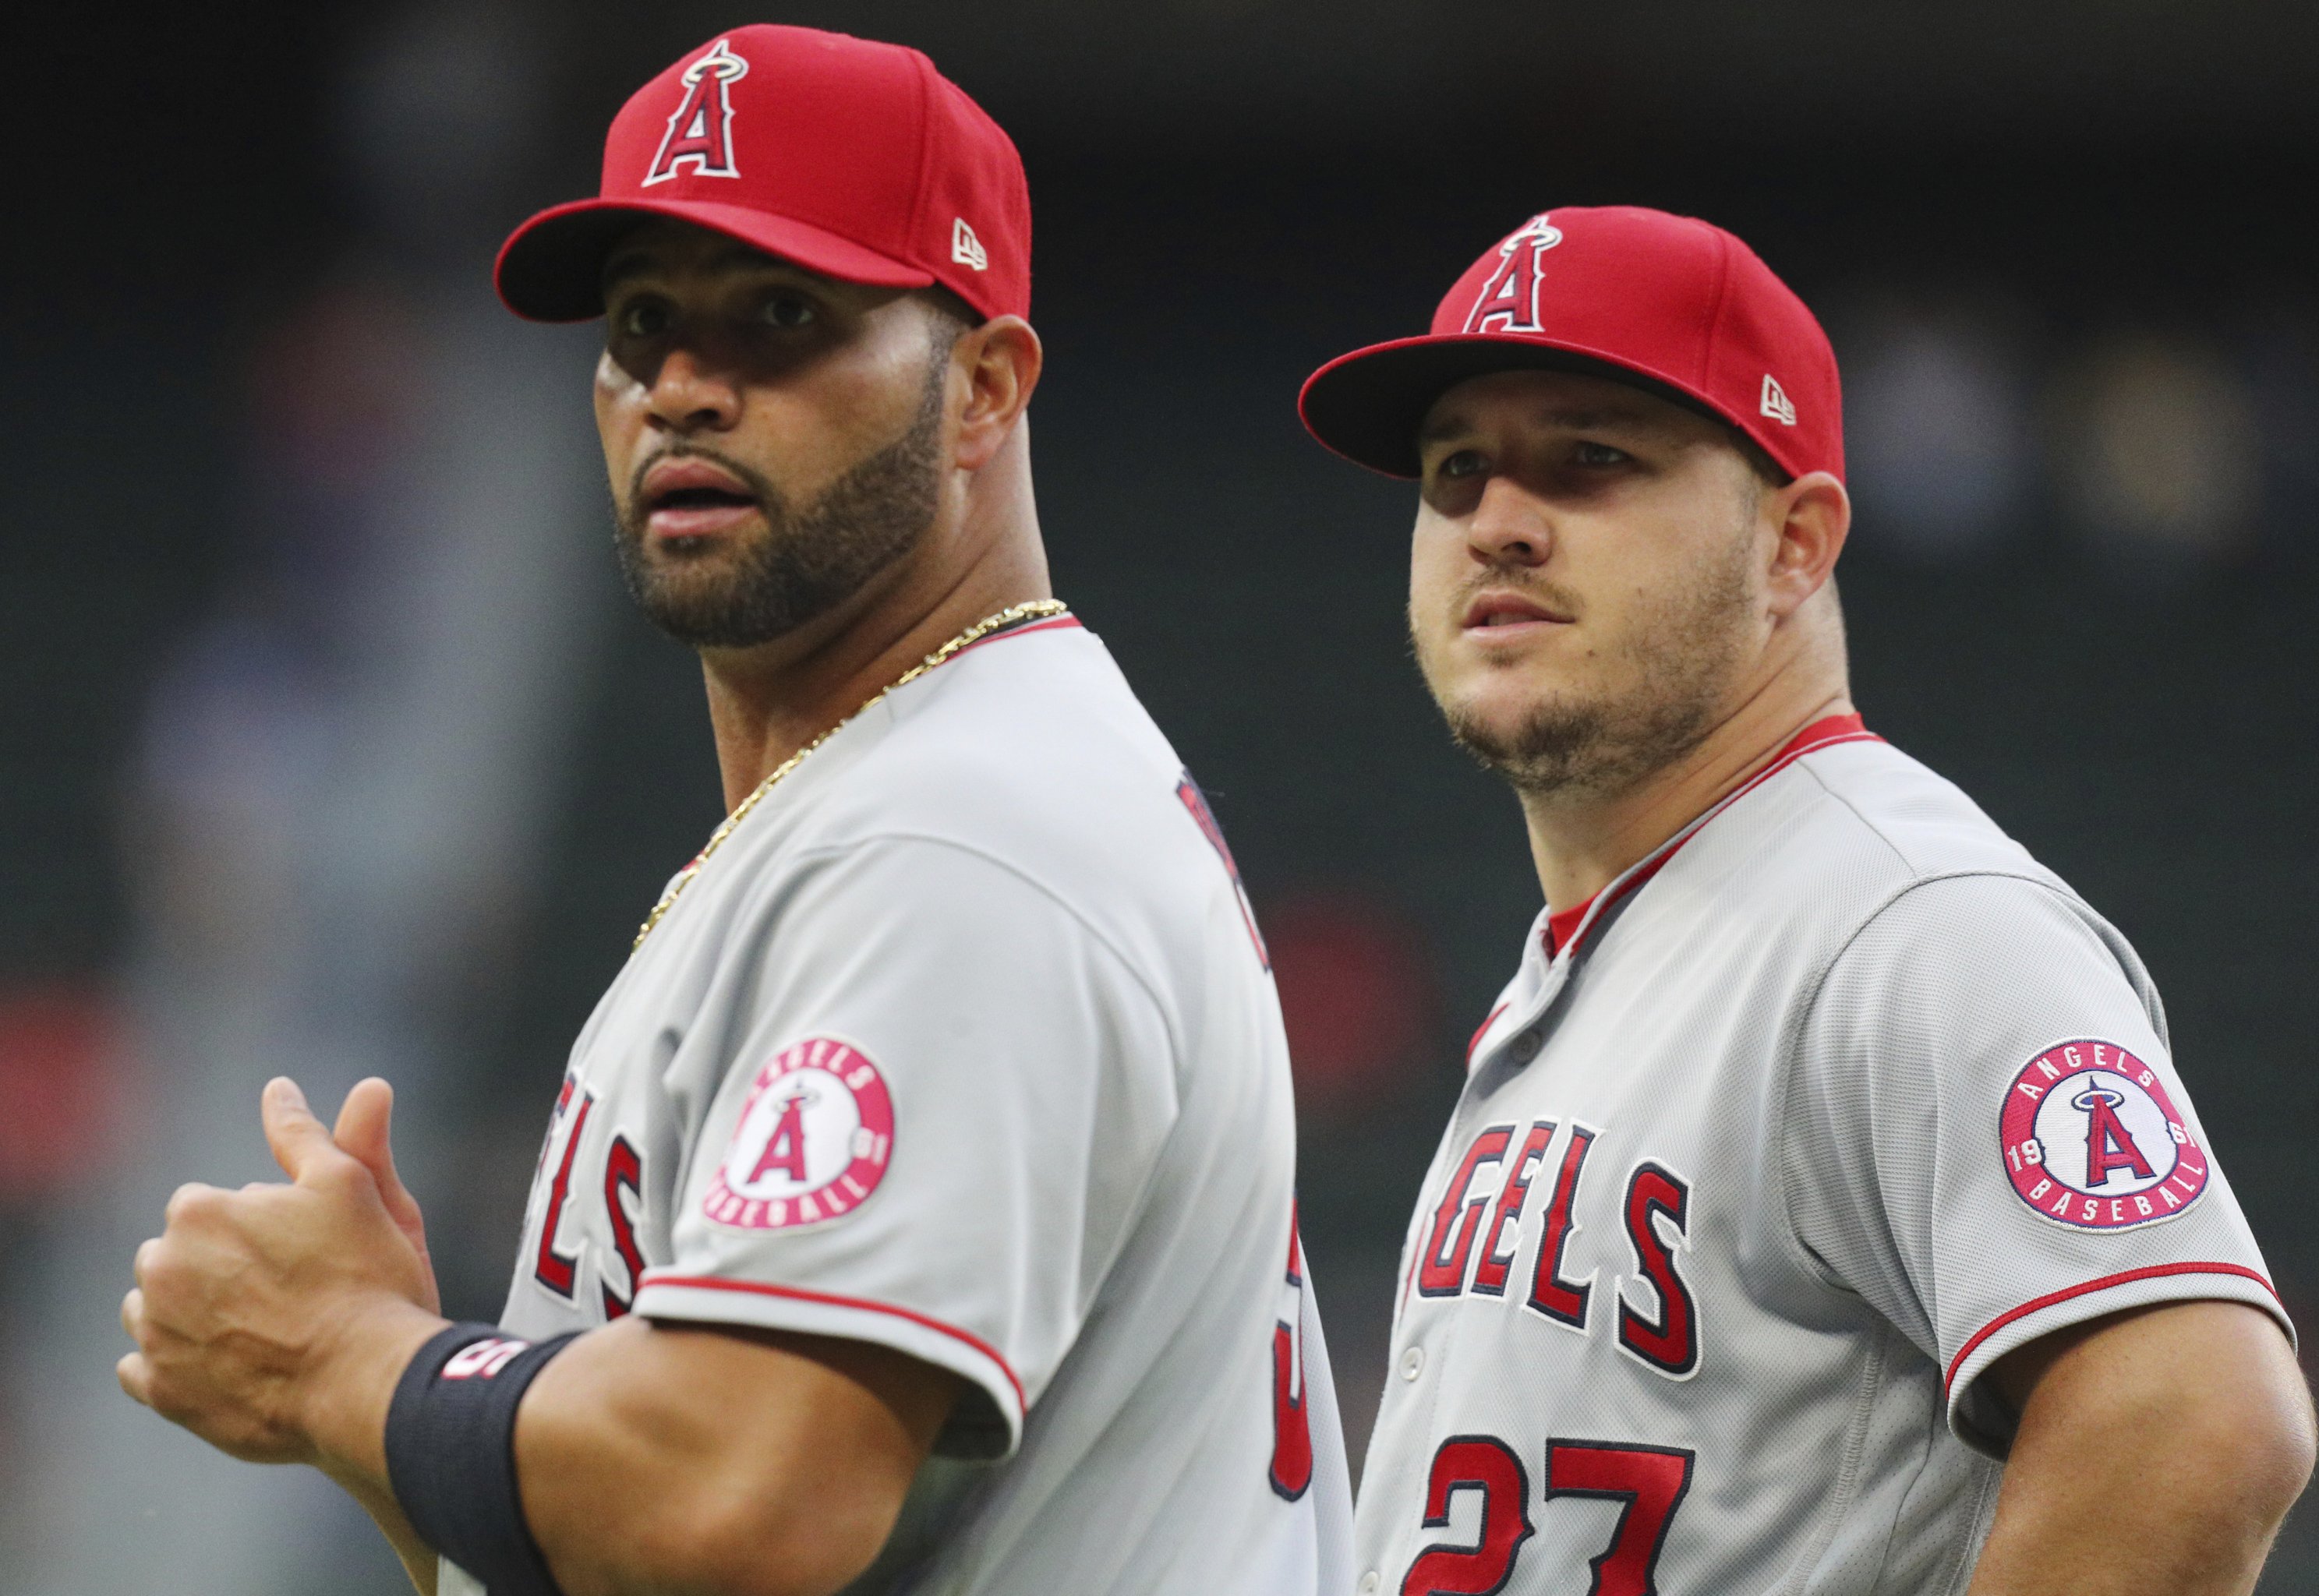 Dodgers' Albert Pujols Called Angels' Shohei Ohtani During Home